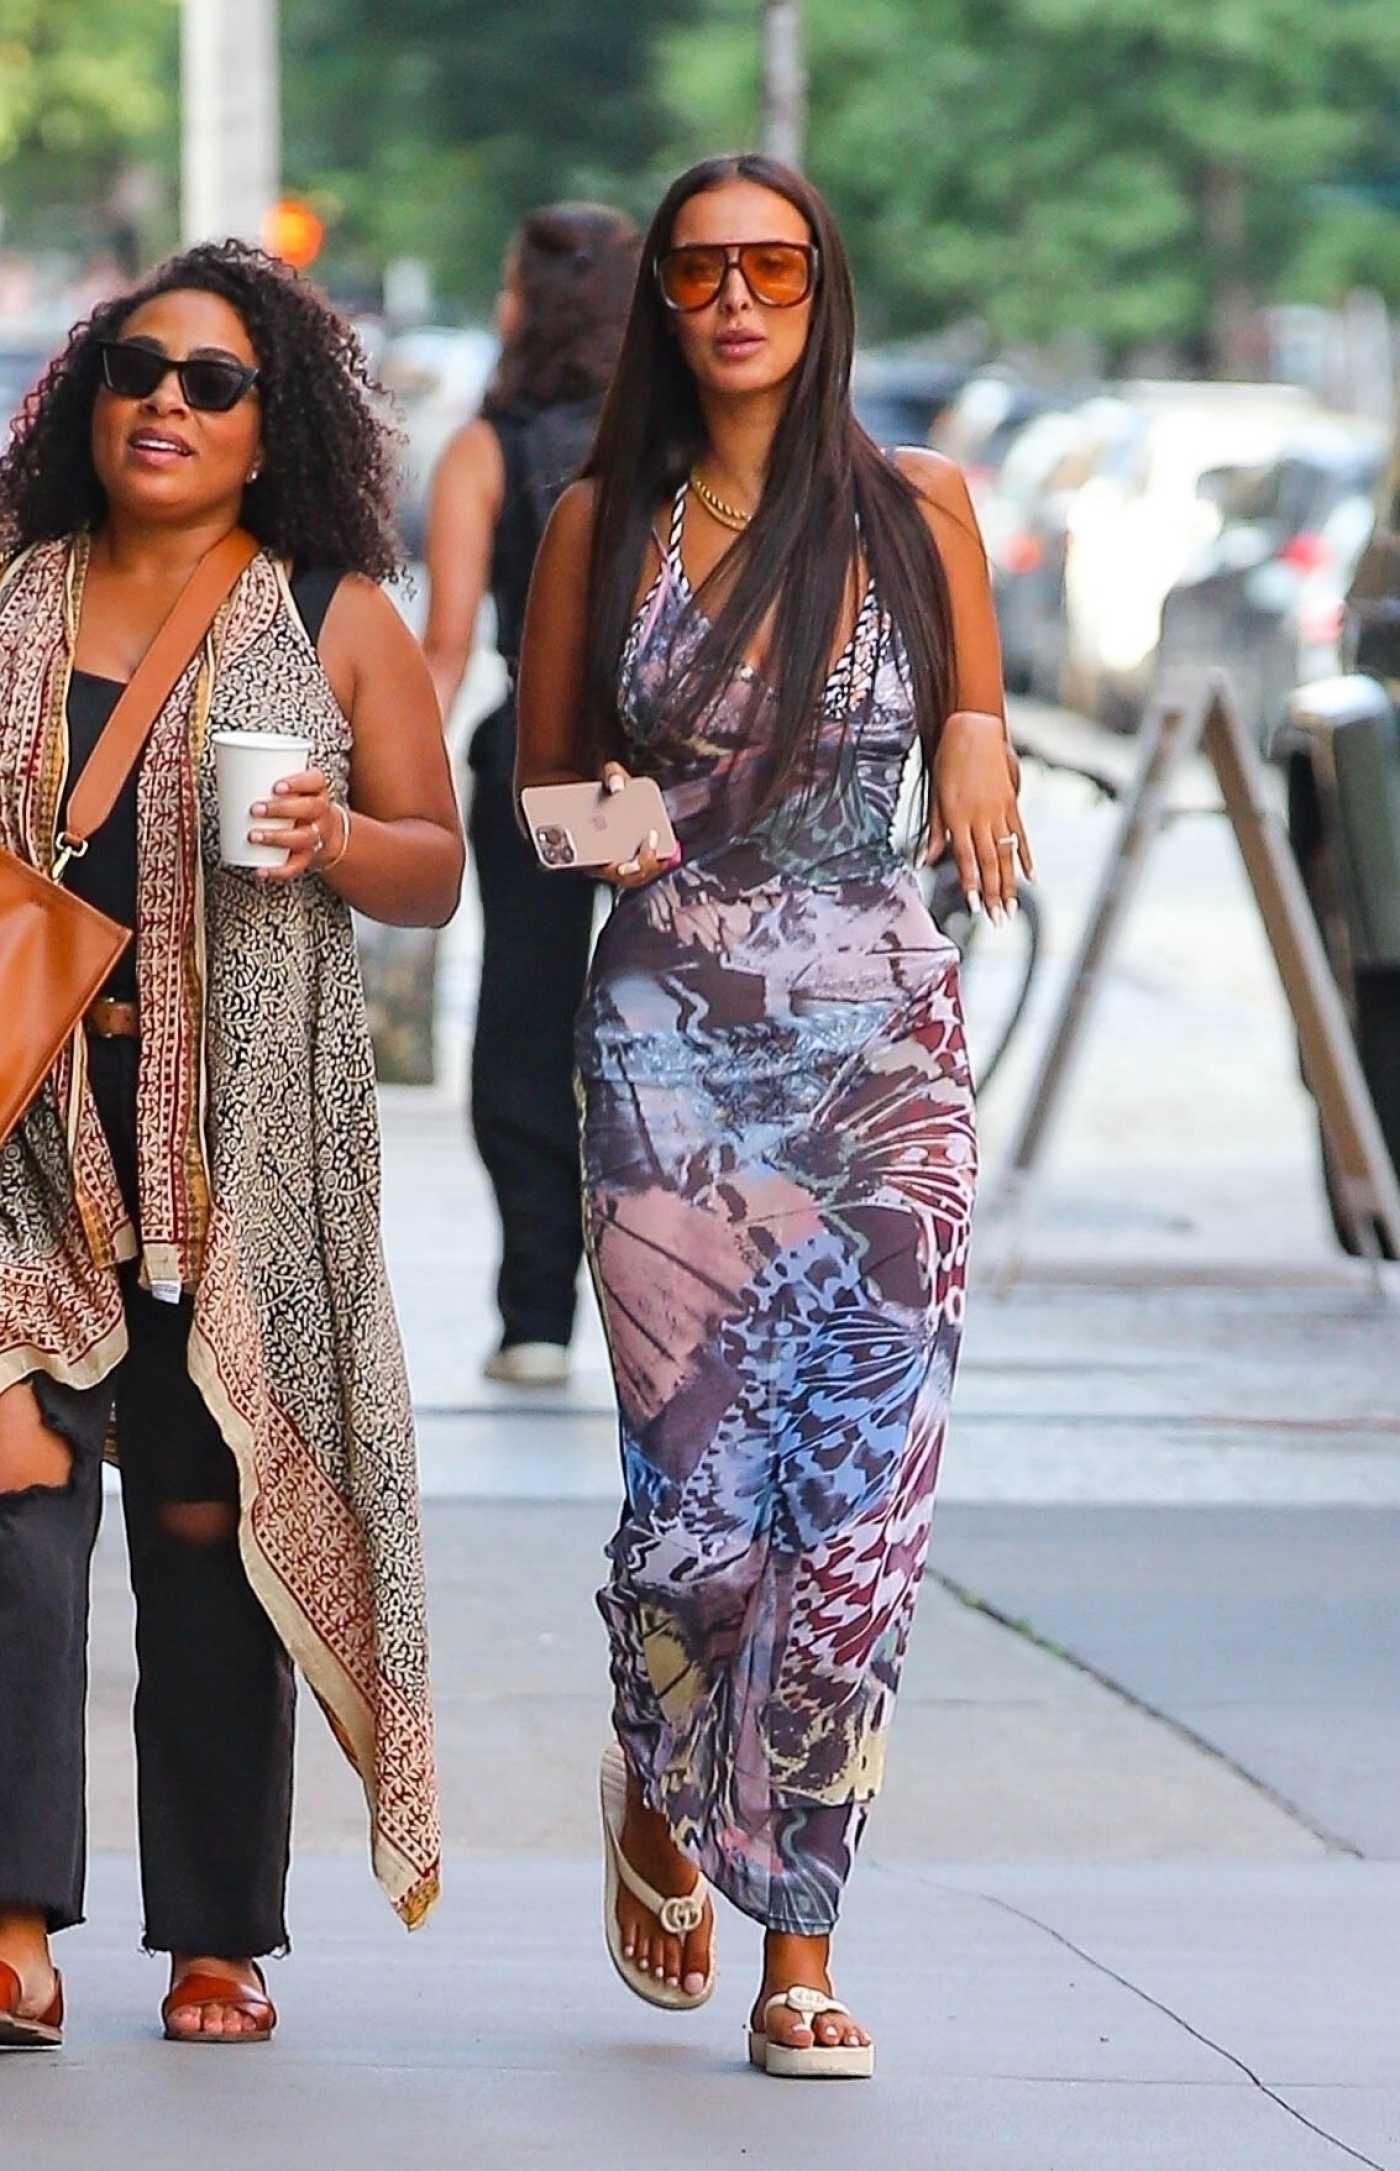 Maya Jama in a Patterned Dress Was Seen Out with Friends in New York City 08/25/2022